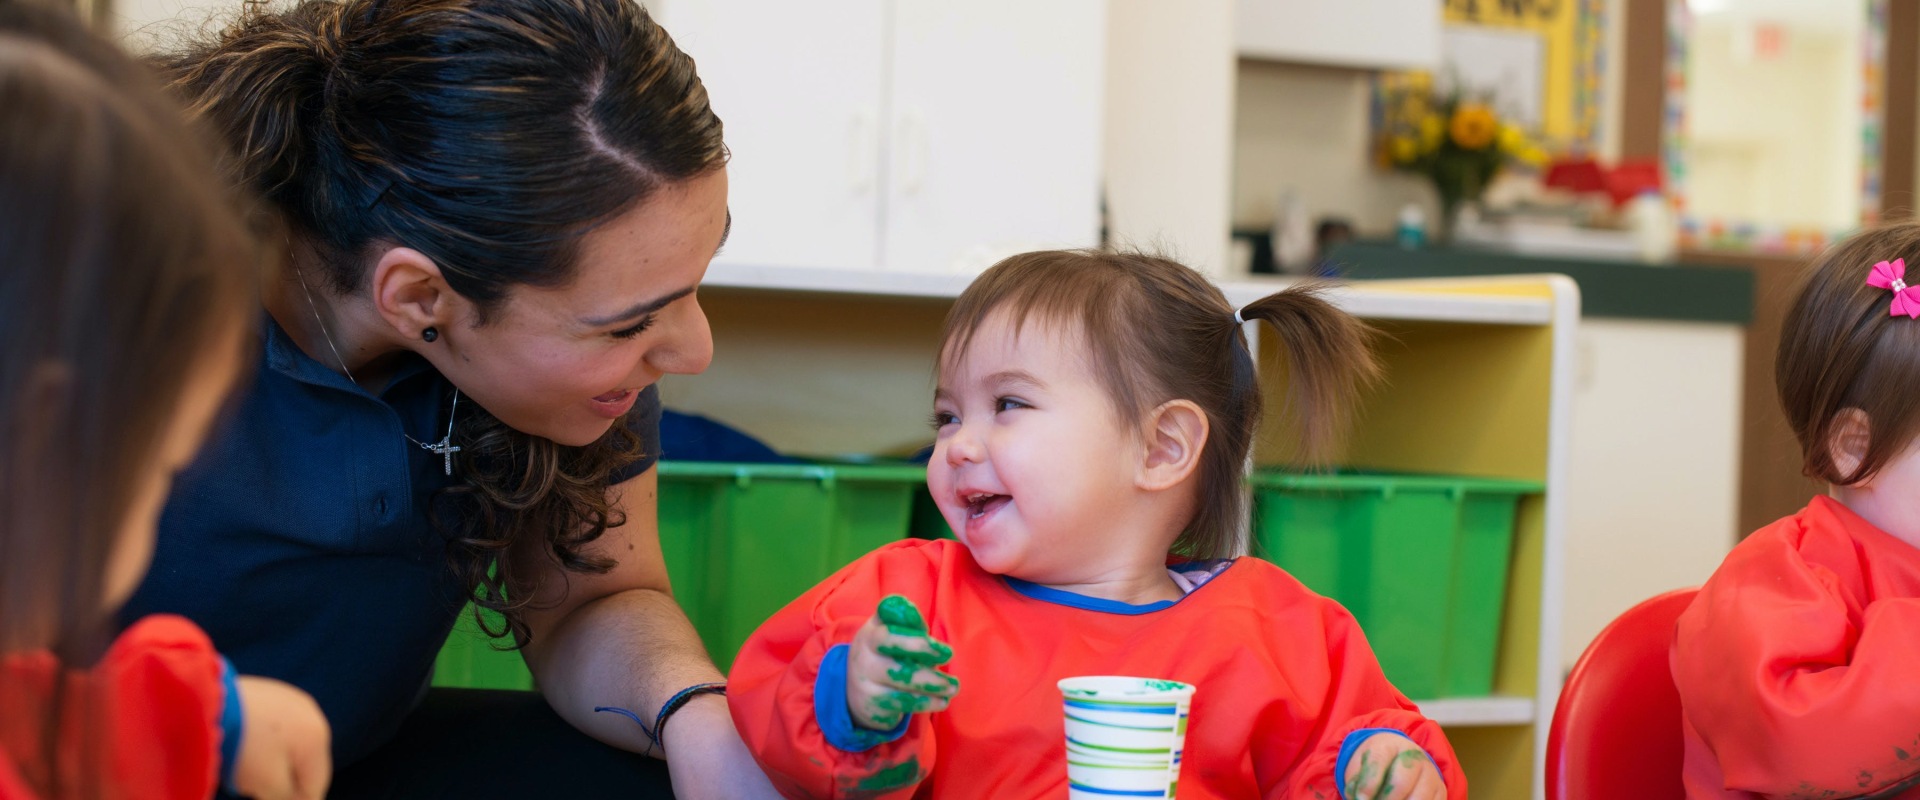 The Top 10 Daycares and Preschools in Columbus, Ohio